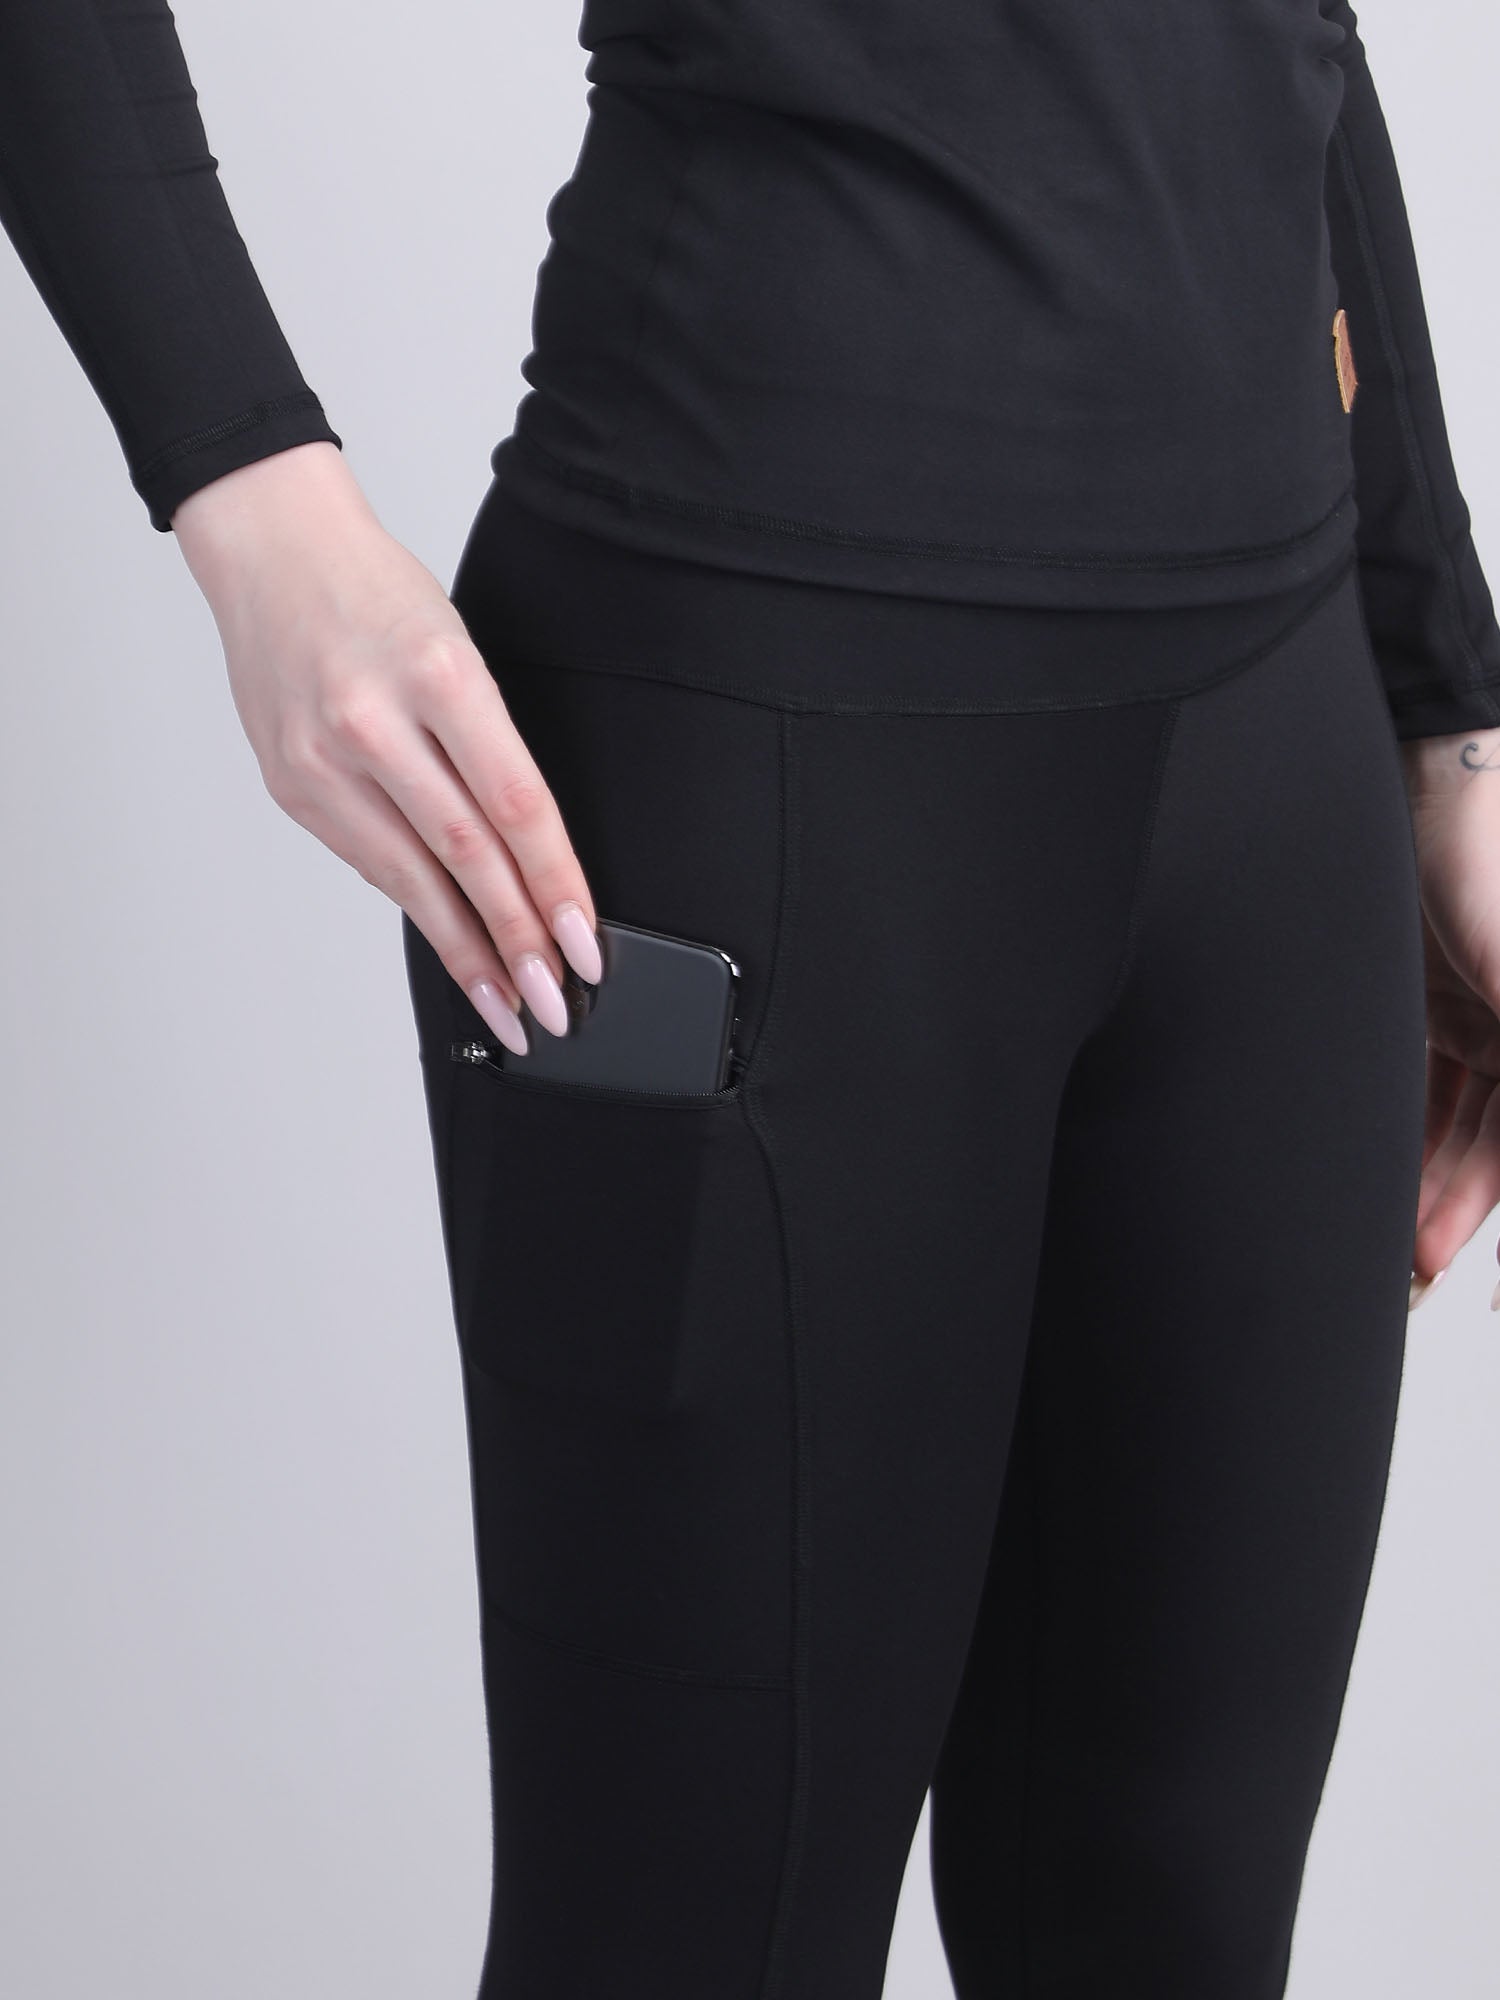 Gym pants for women with pockets